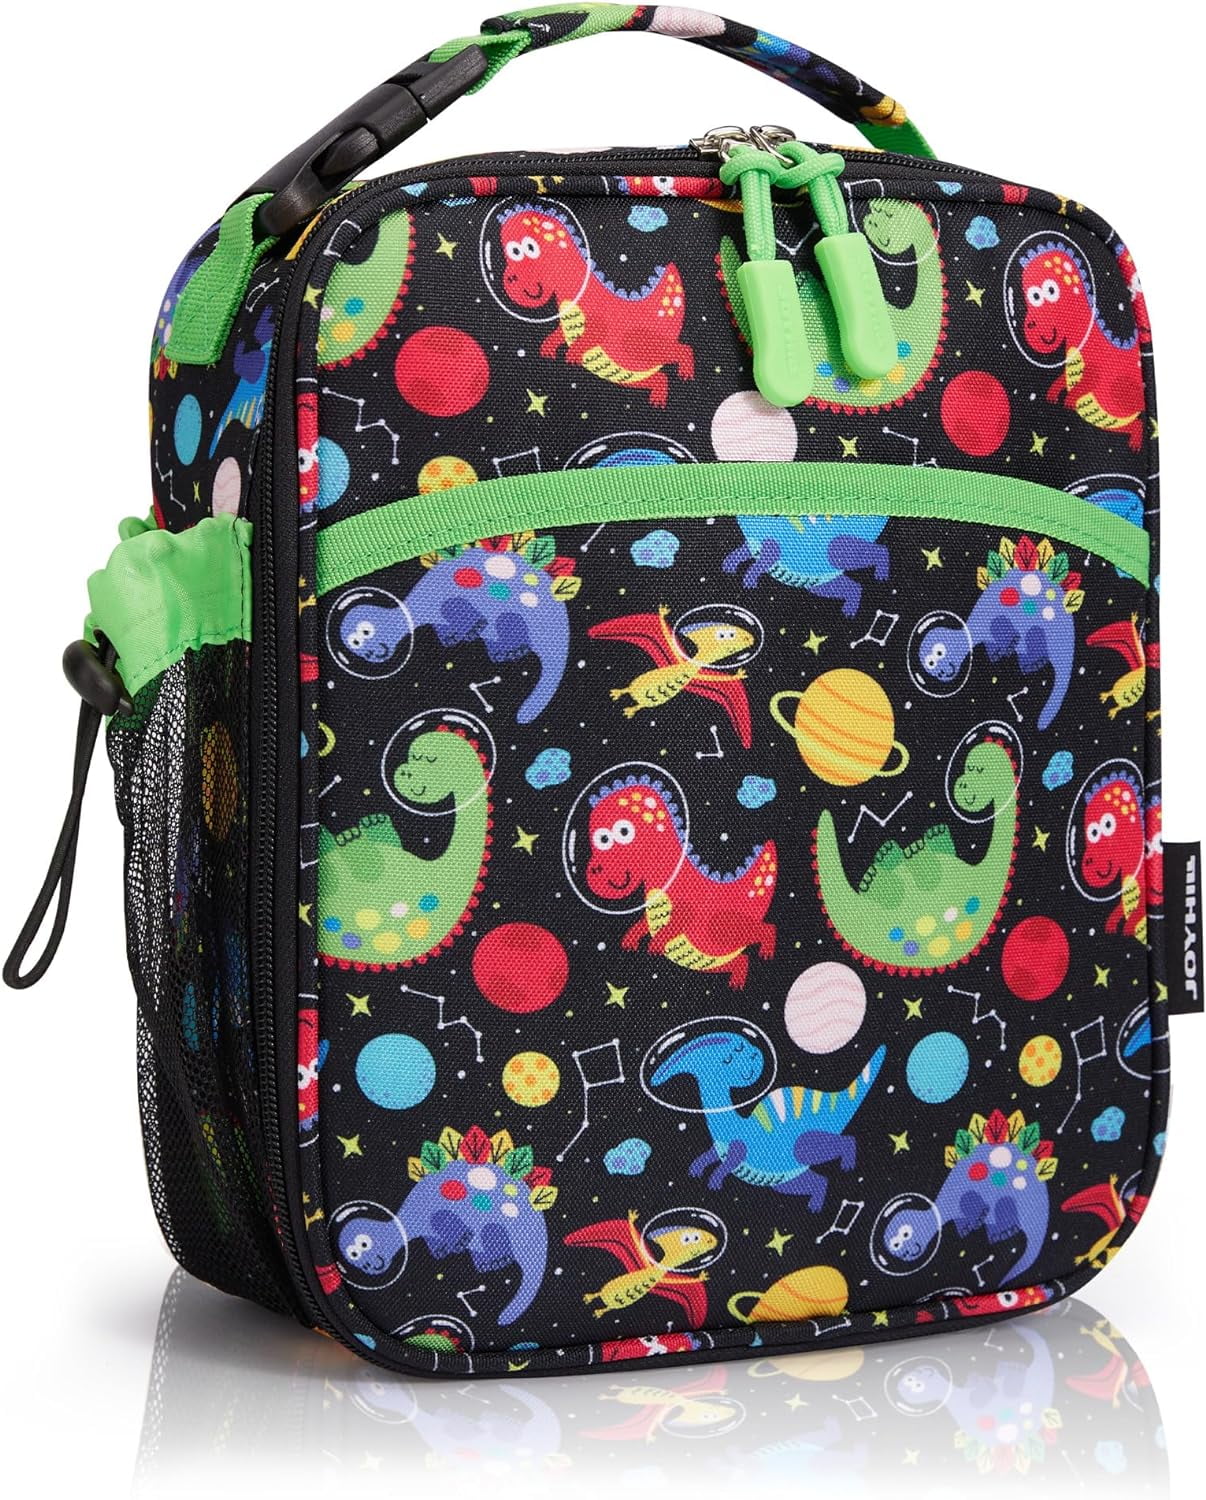 Yous Auto Lunch Box Kids,Insulated Lunch Box for Boys and Girls,Washable  Lunch Bag and Reusable Toddler Lunch Boxes for Daycare and School Dinosaur